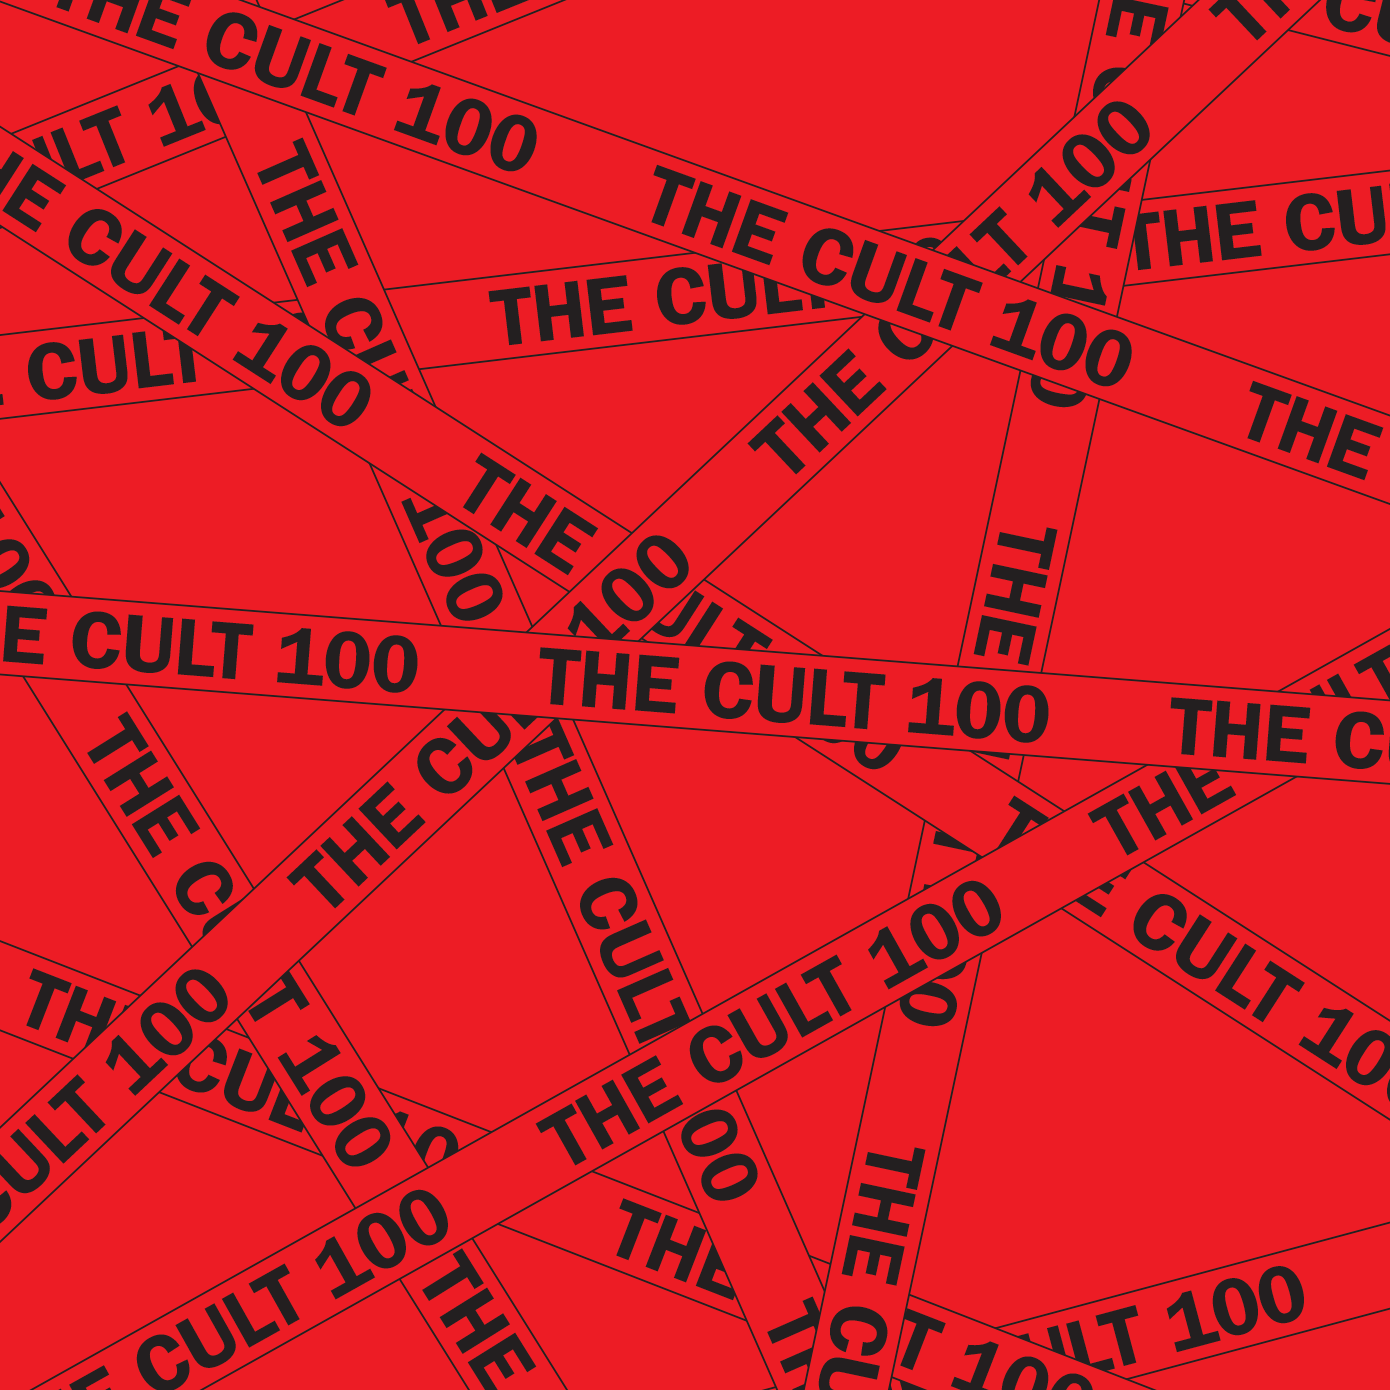 The Cult 100